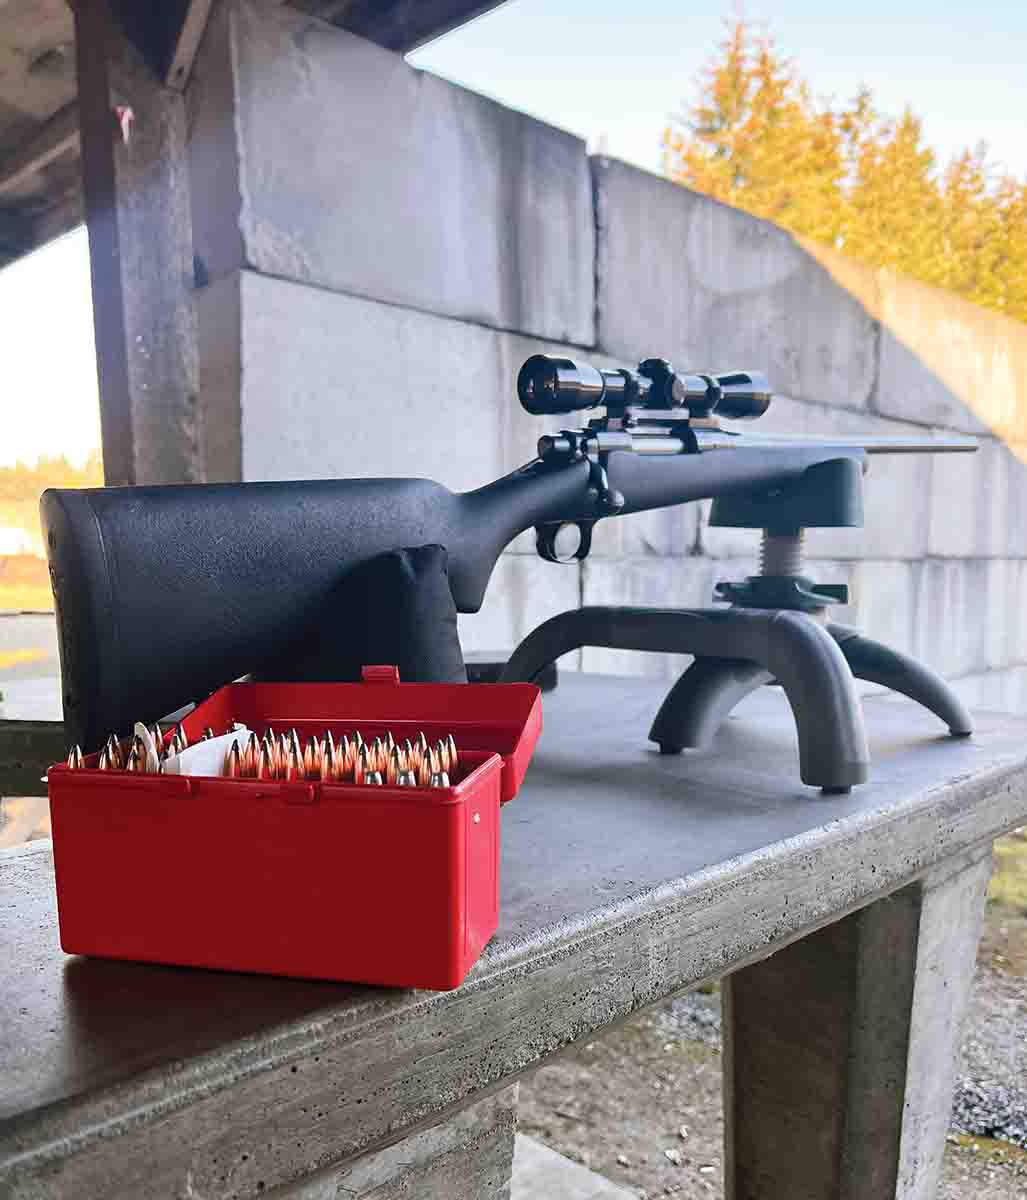 The Remington ADL chambered in .338-06 AI with Speer 200-grain spitzer softpoint bullets.